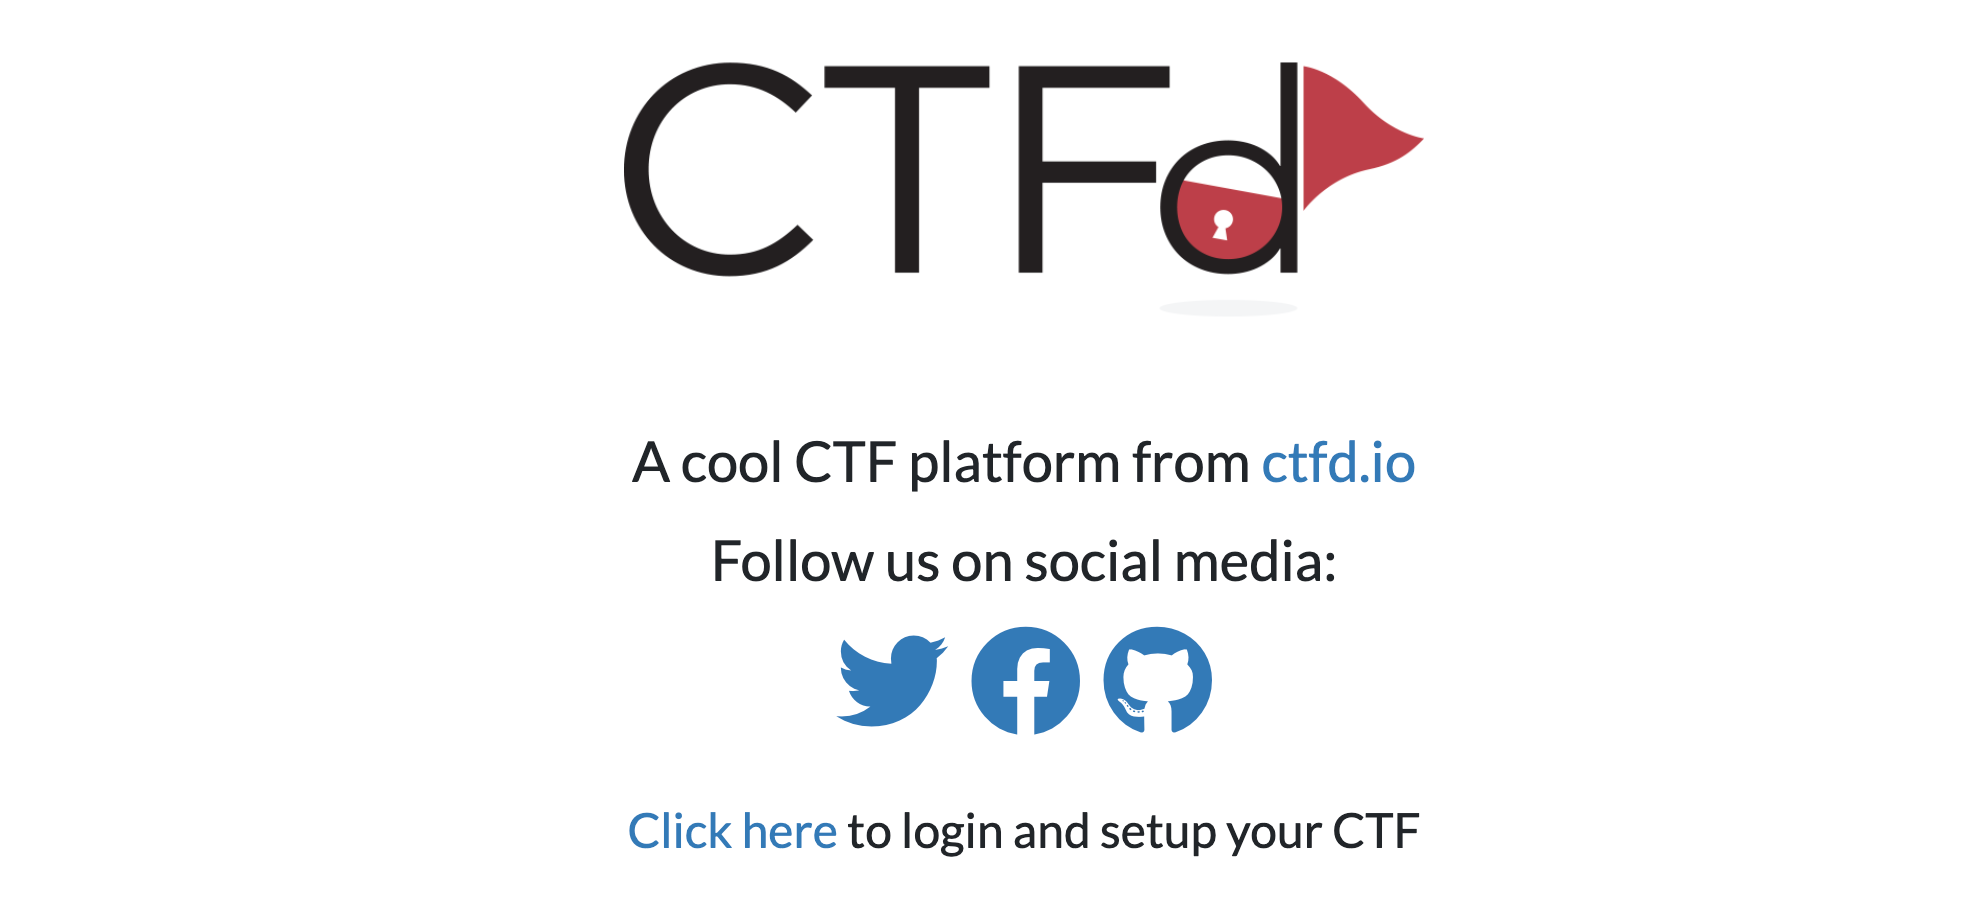 CTFd setup page - initial configuration complete